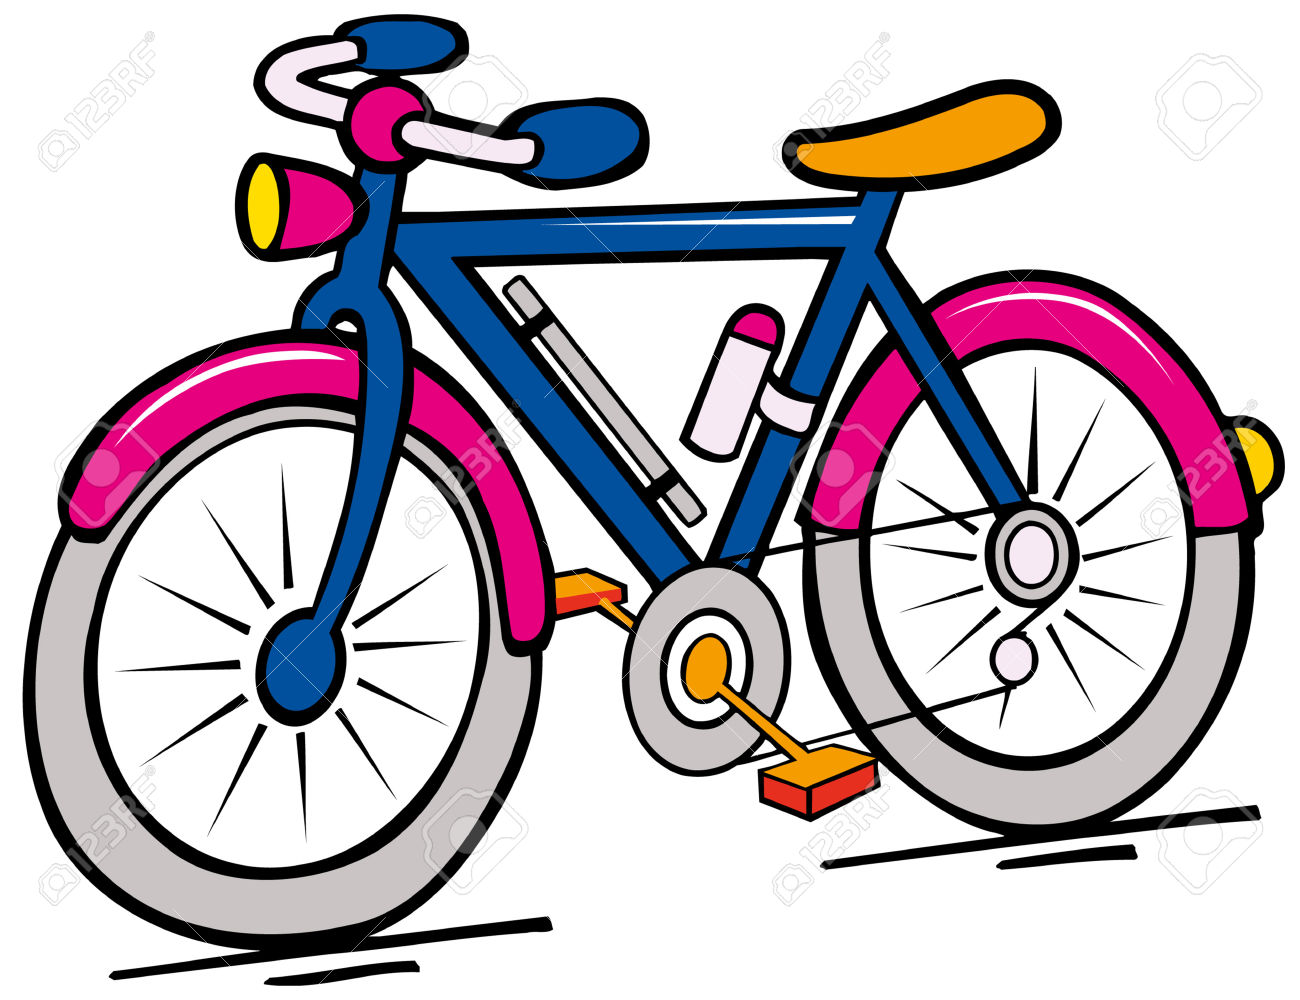 Cartoon pictures bicycle.